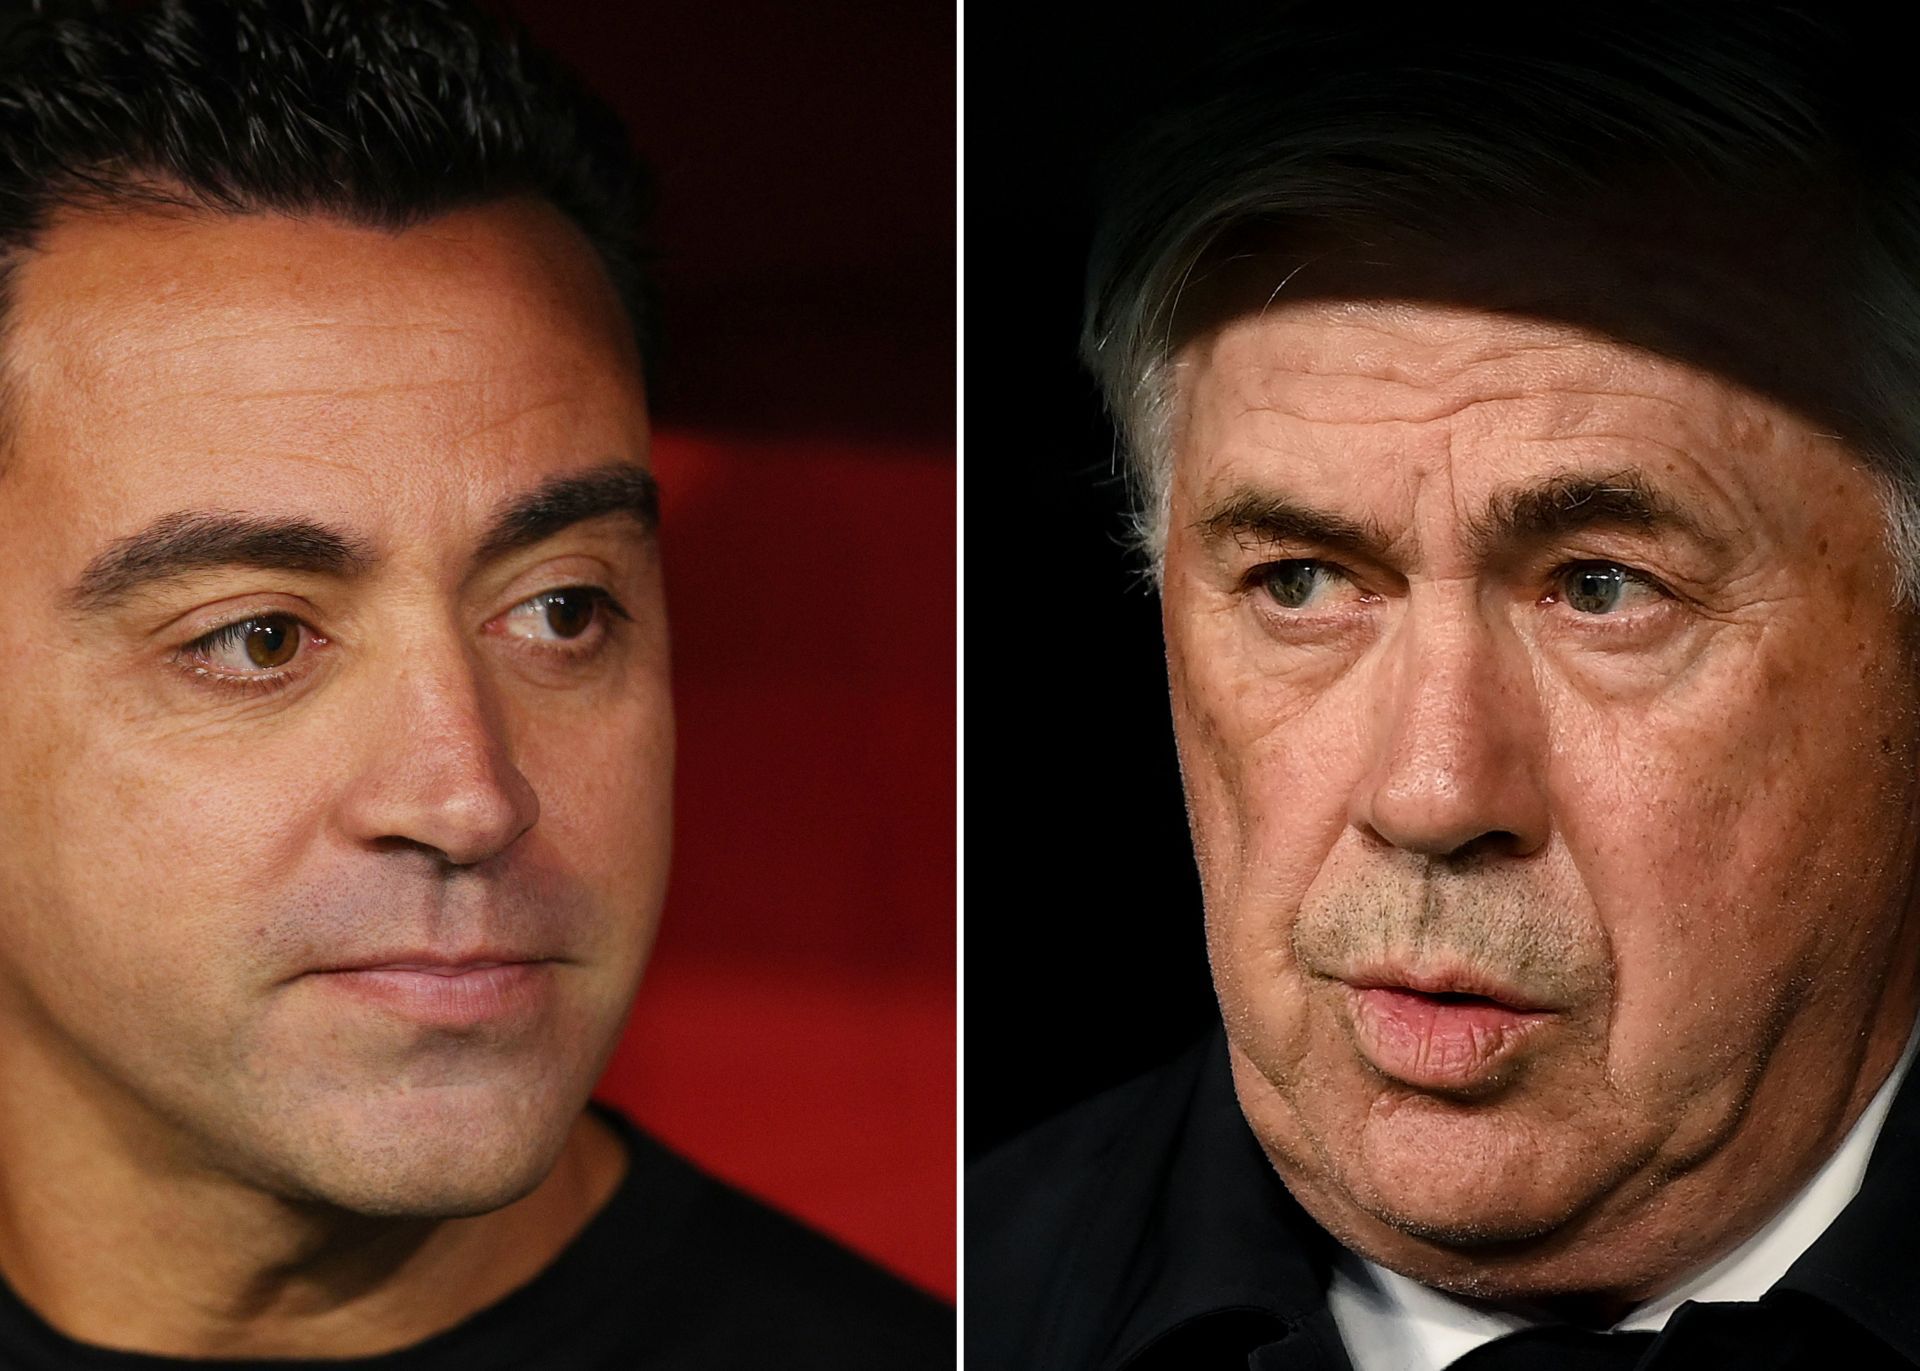 Carlo Ancelotti (right) is adamant his side will win a major trophy.